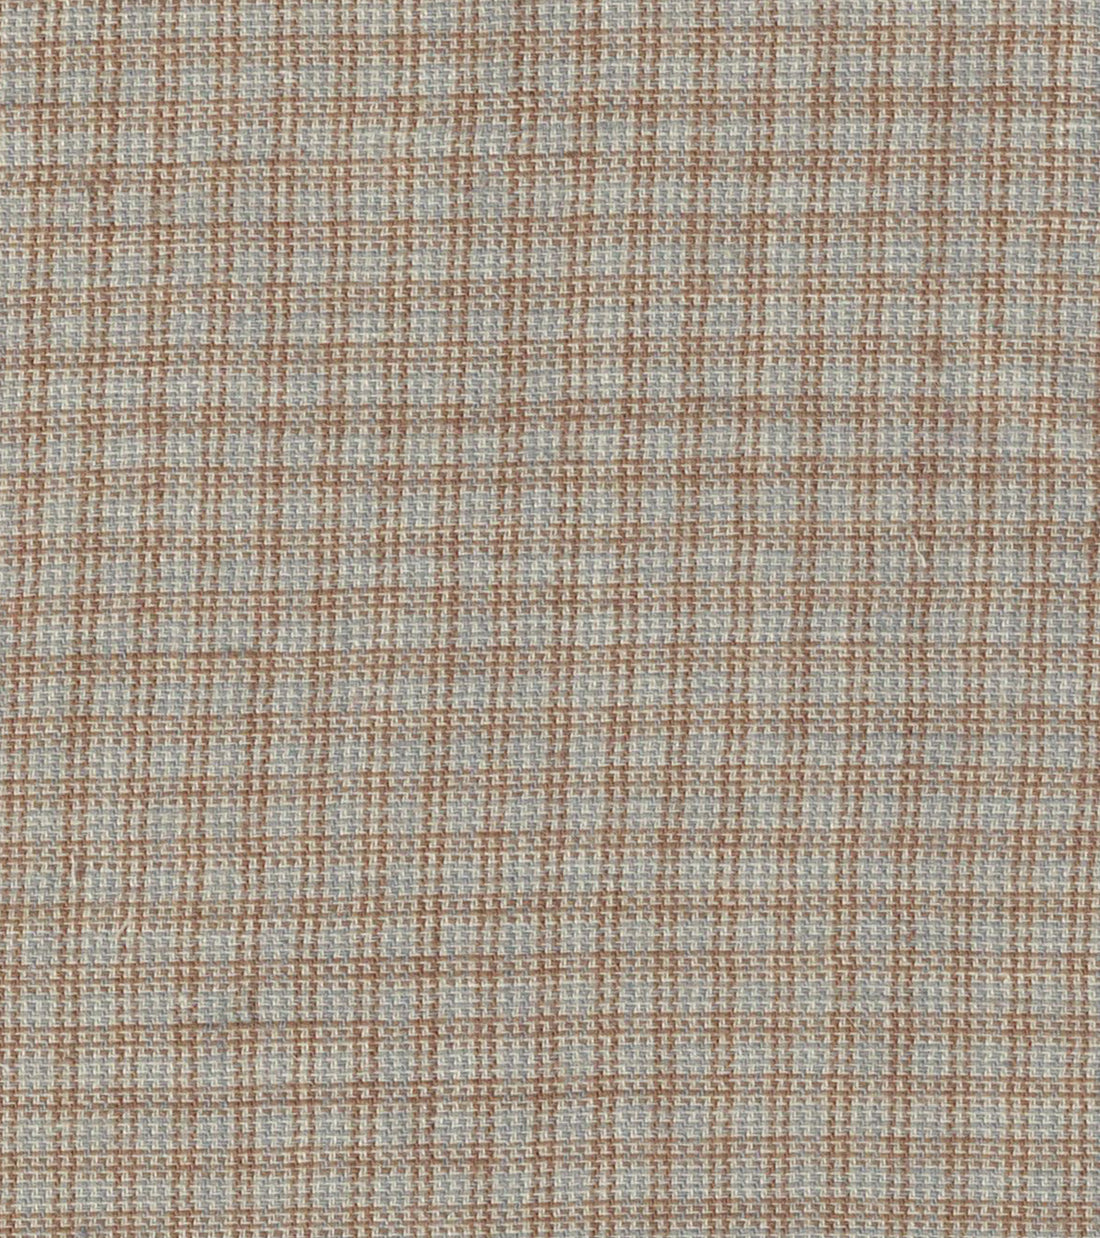 Bryceland’s Frogged Button Shirt Made-to-order Tan/Blue Micro Check